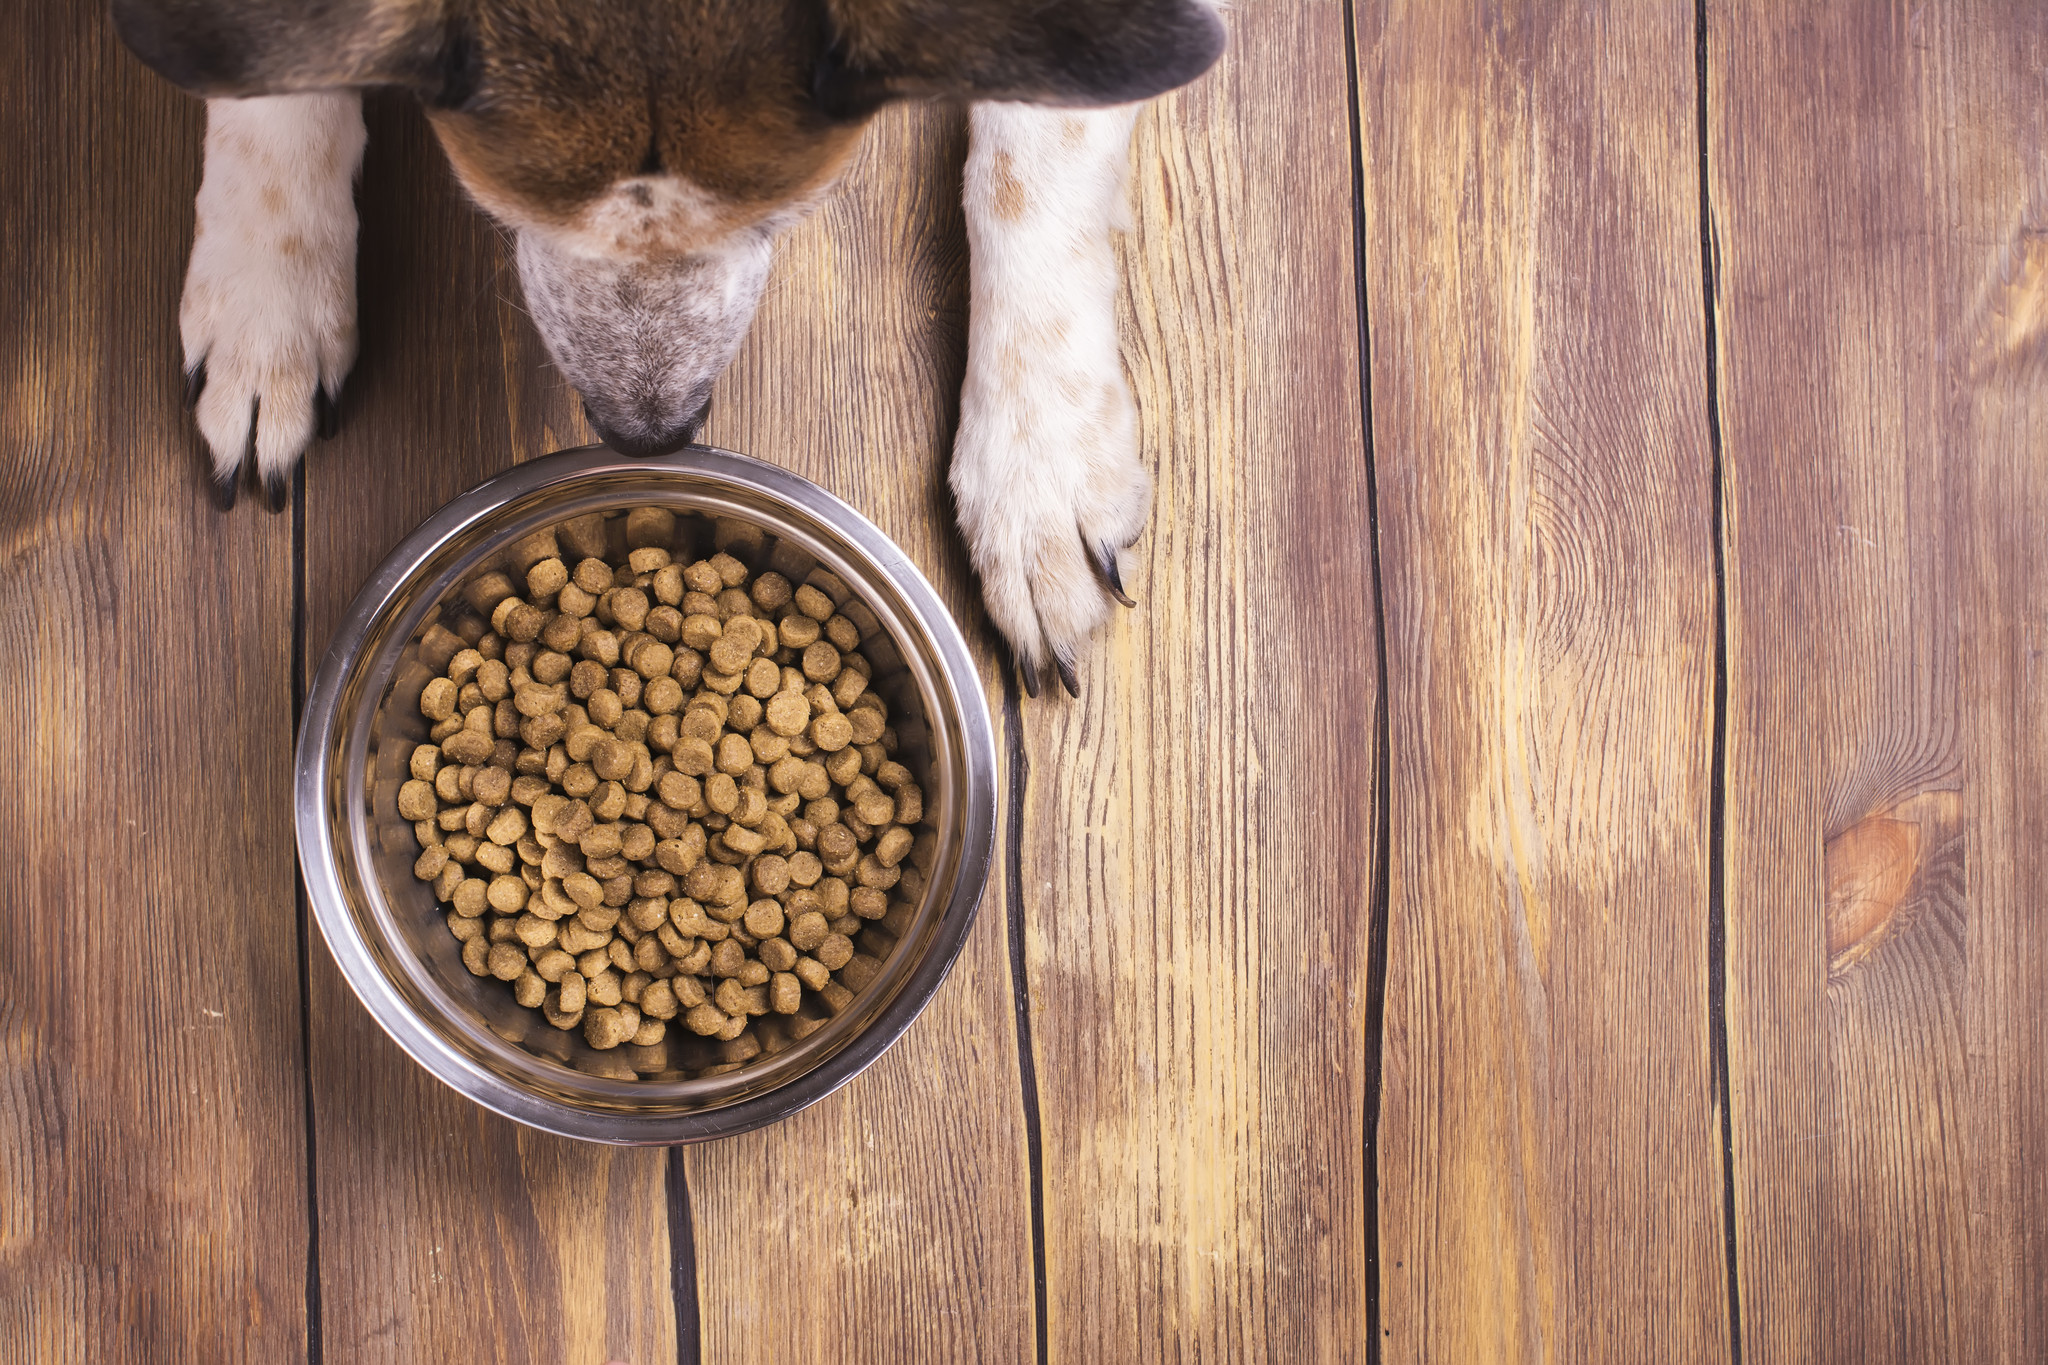 https://cdn.shoplightspeed.com/shops/621465/files/21681970/picky-eaters-how-to-get-my-dog-to-eat-his-food.jpg